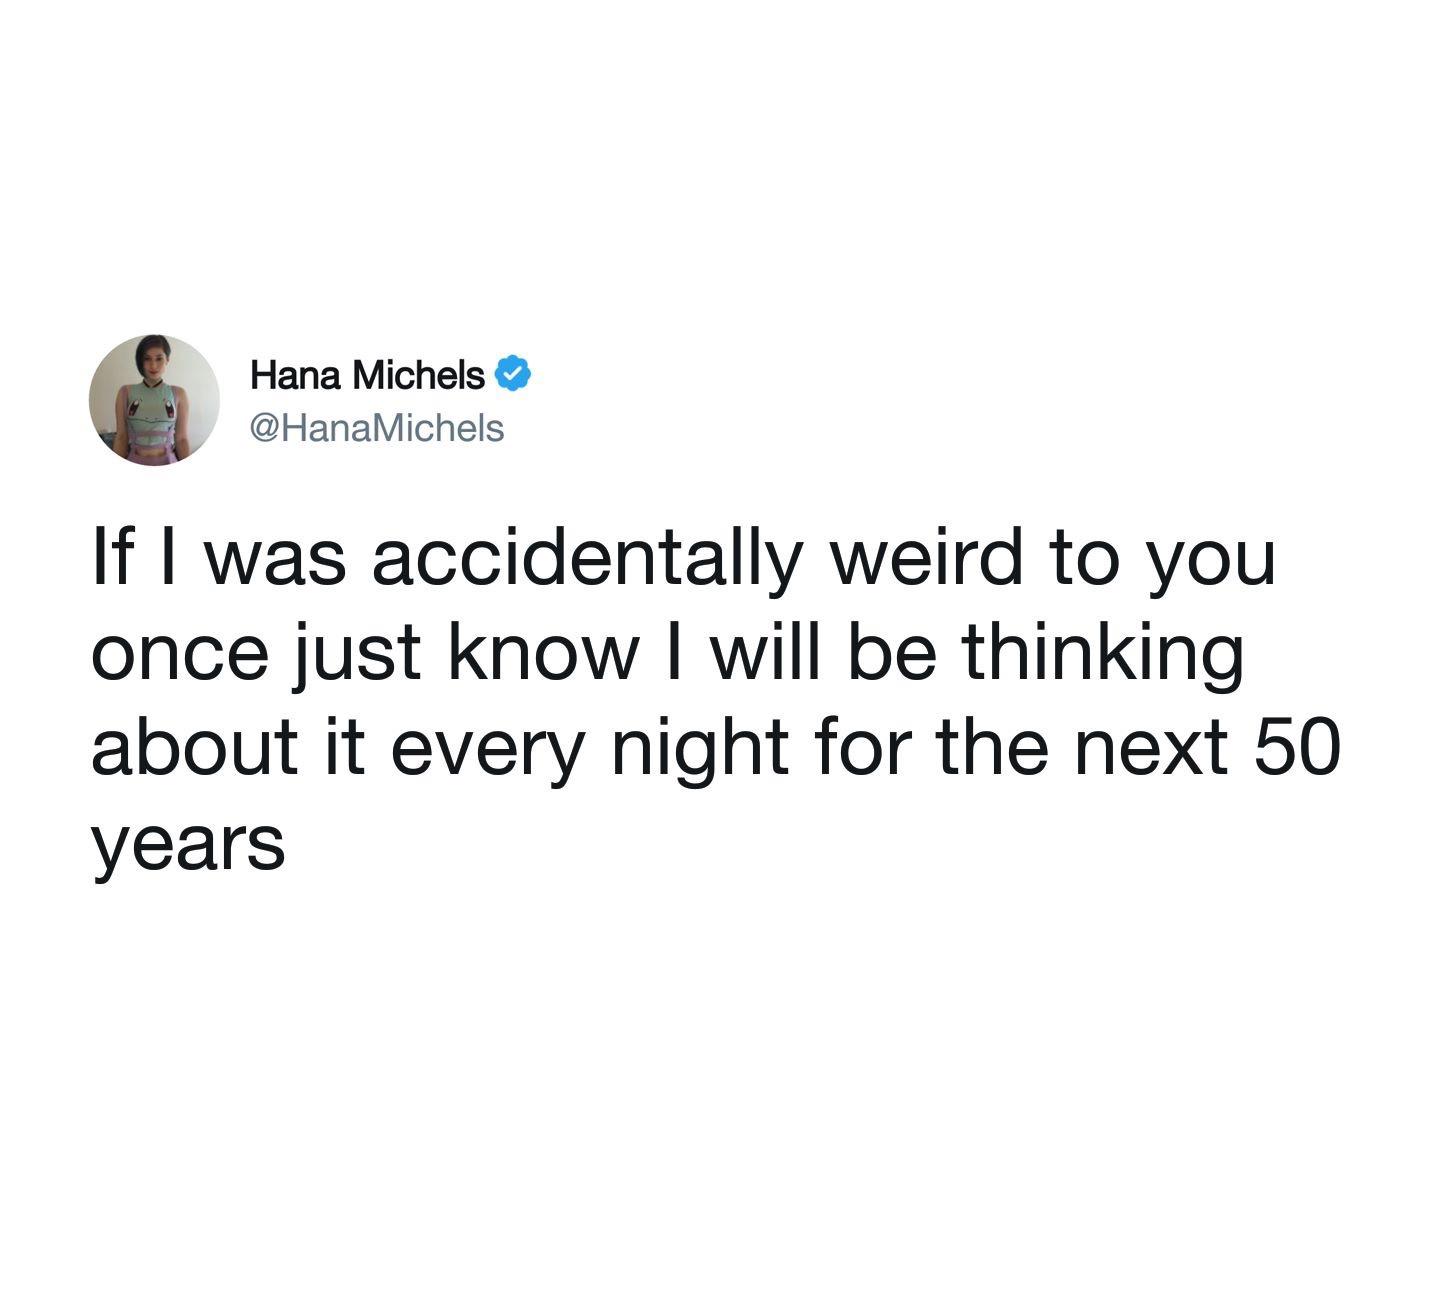 funny tweets - angle - Hana Michels If I was accidentally weird to you once just know I will be thinking about it every night for the next 50 years